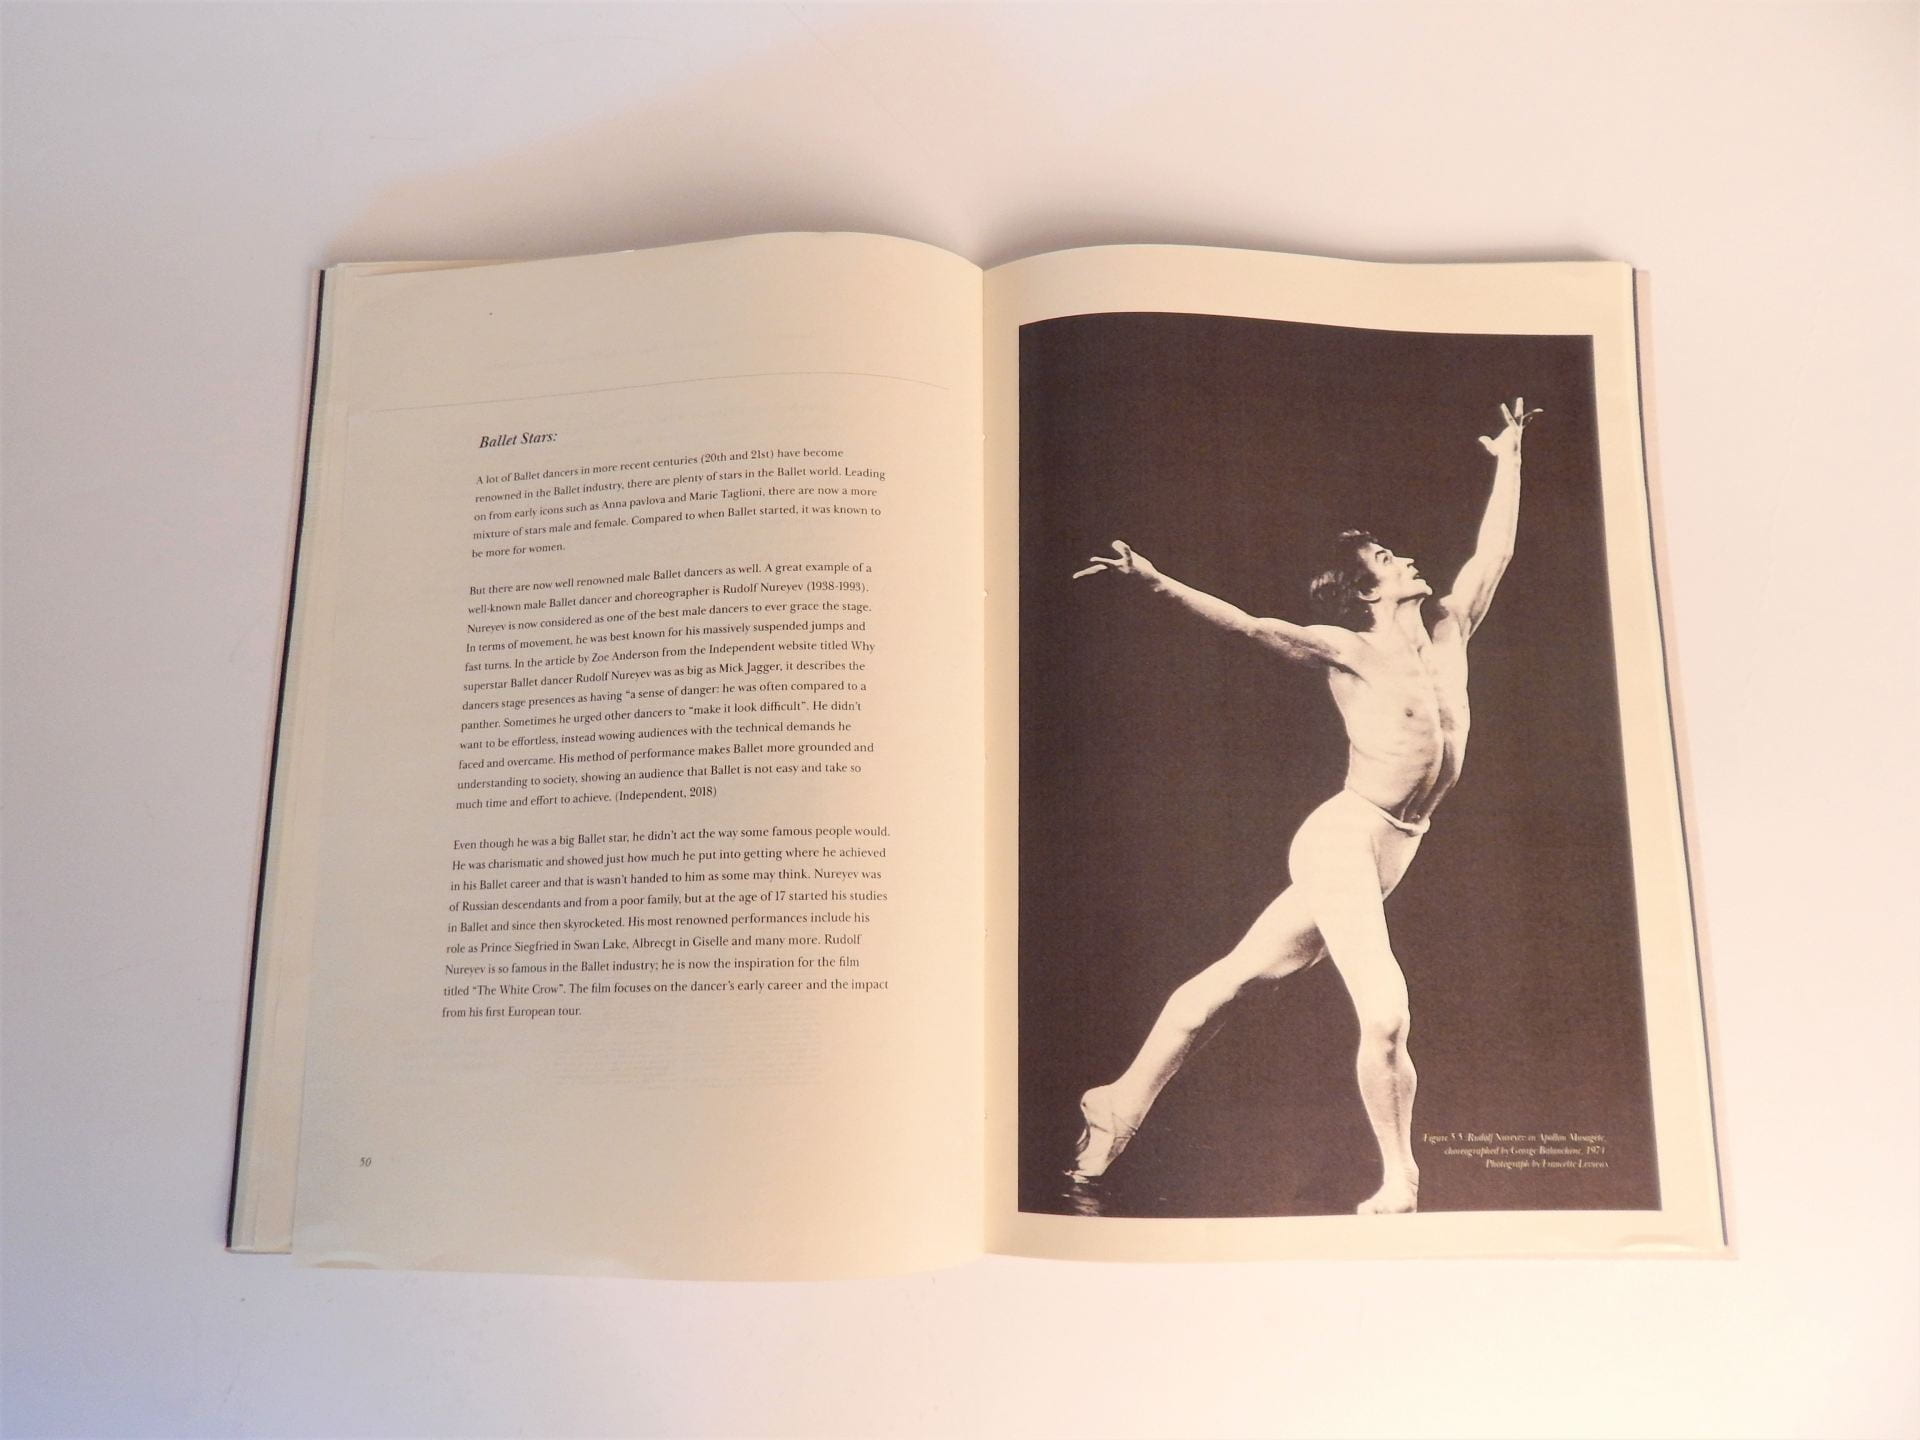 Dissertation paper open at chapter on 'Ballet Stars' with black and white photograph of male ballet dancer.